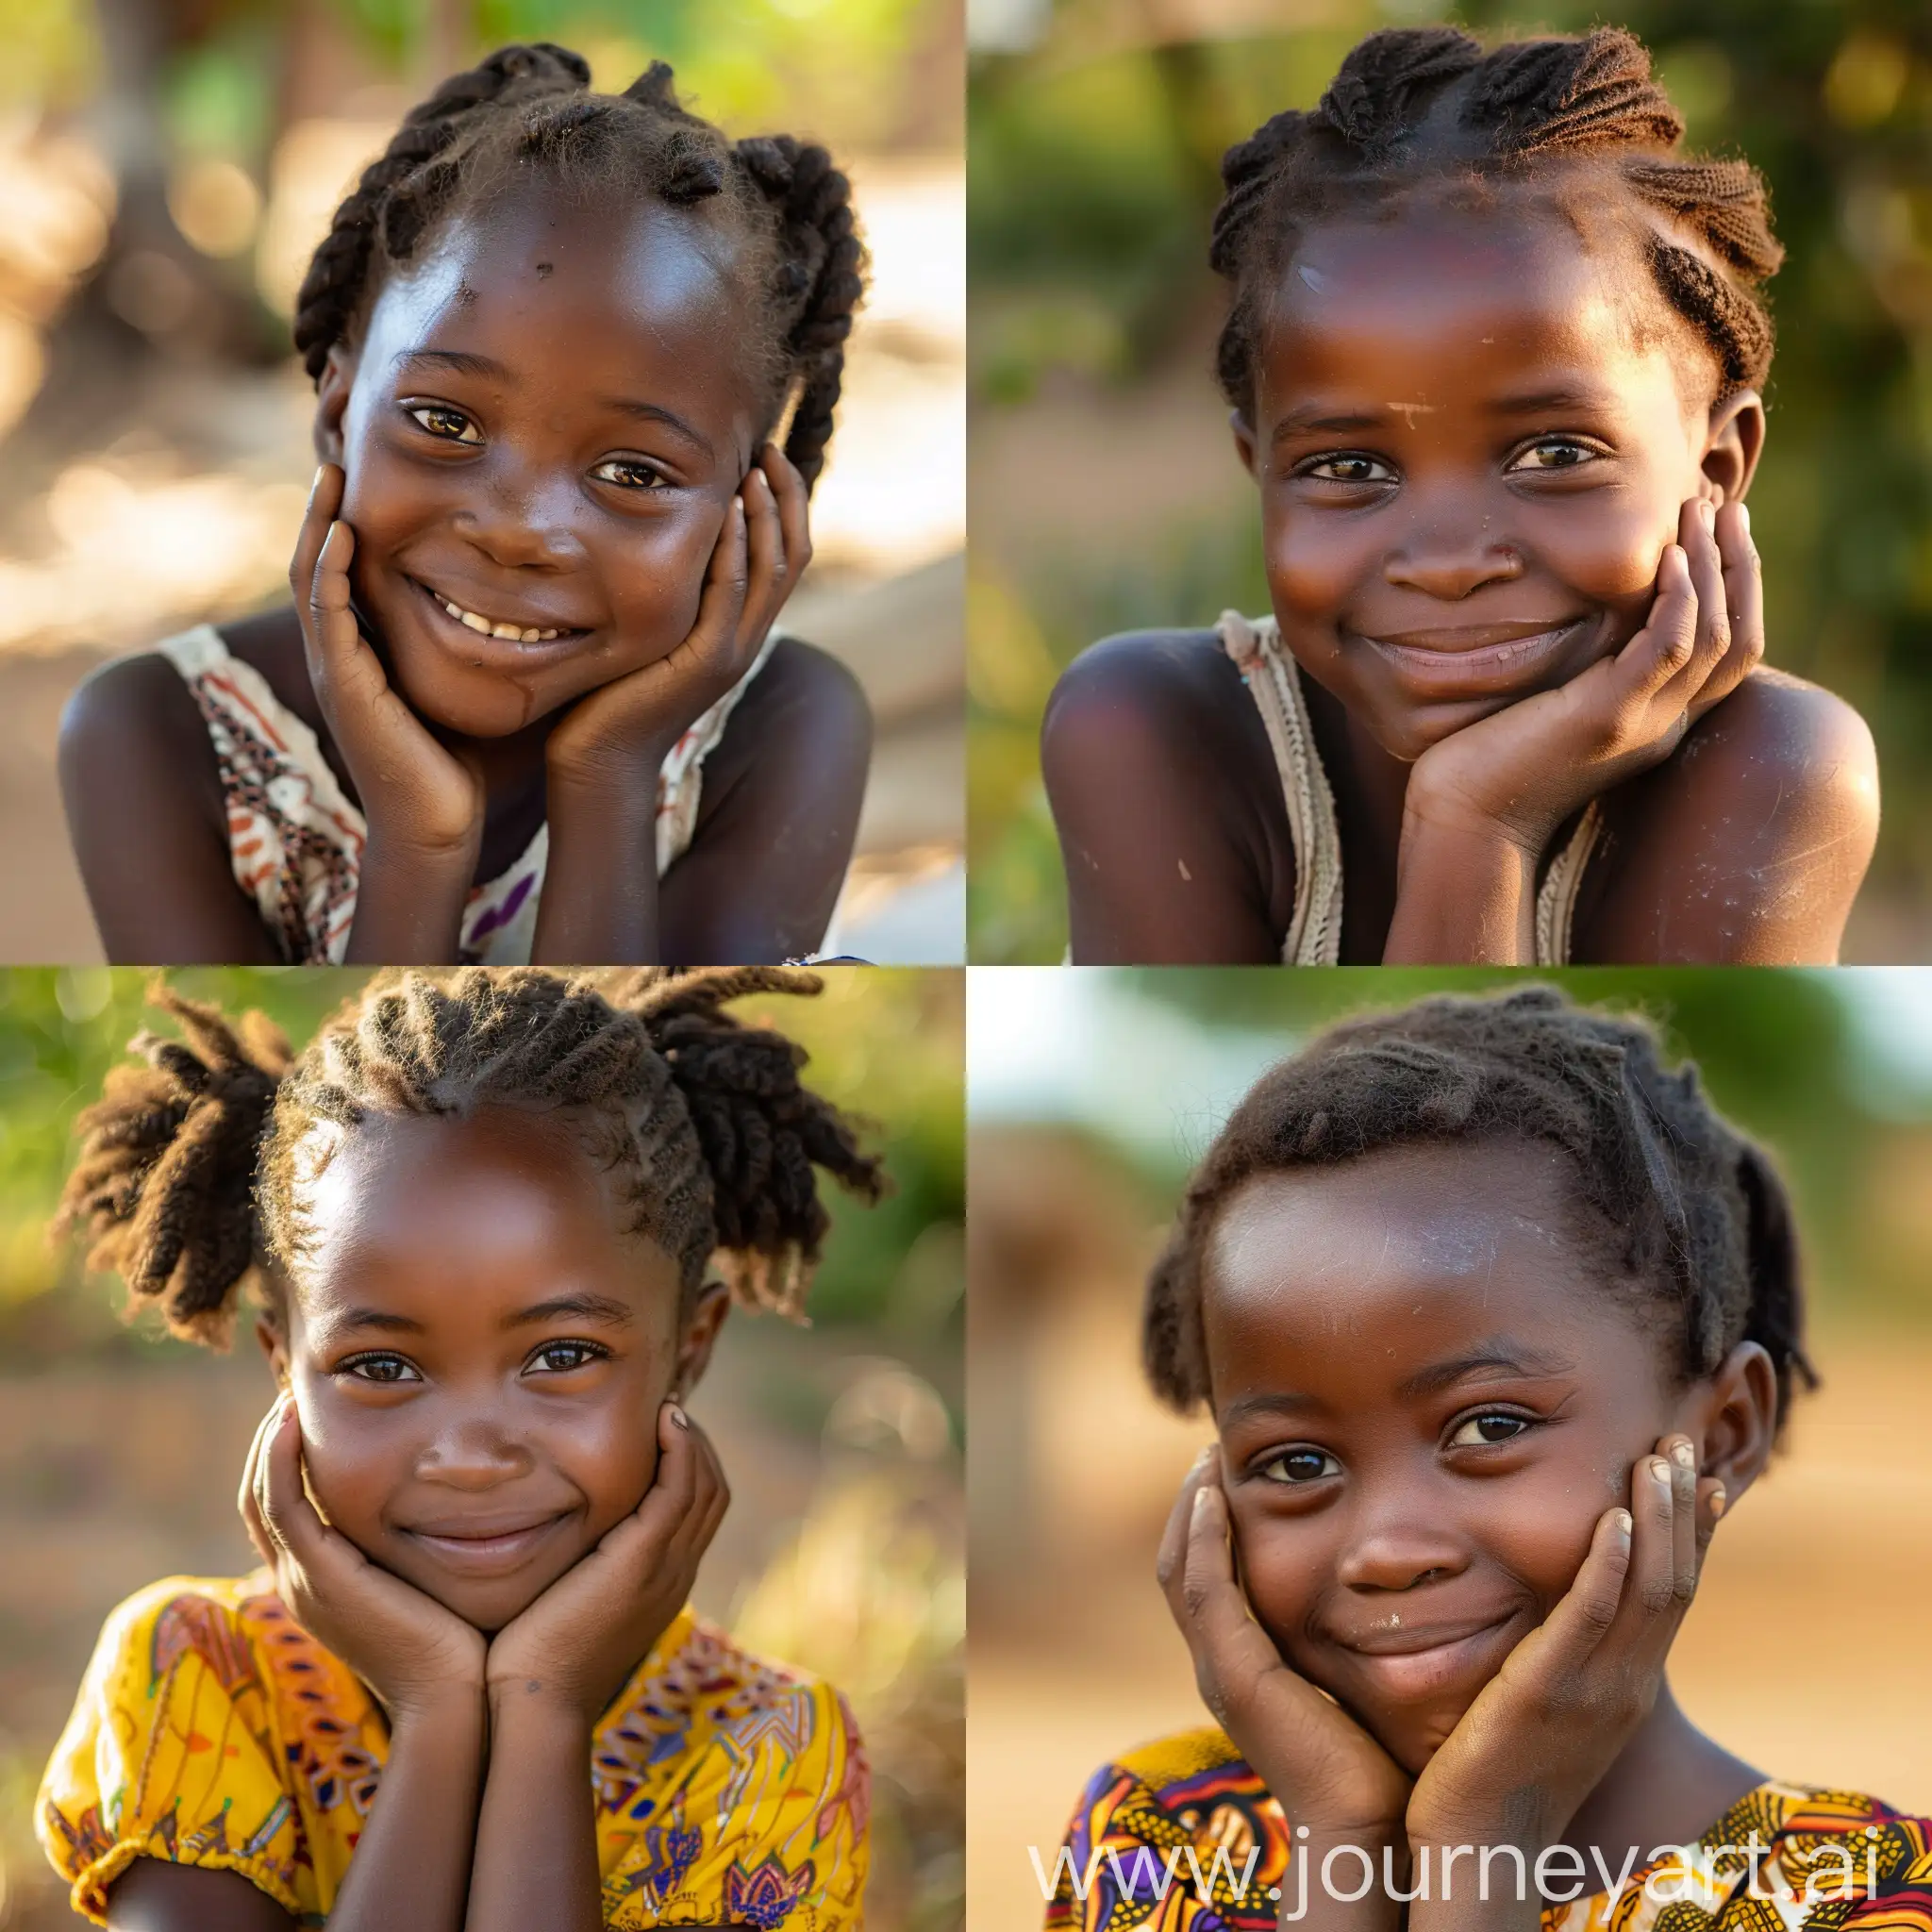 African young girl smiling and holding her face on a sunny day